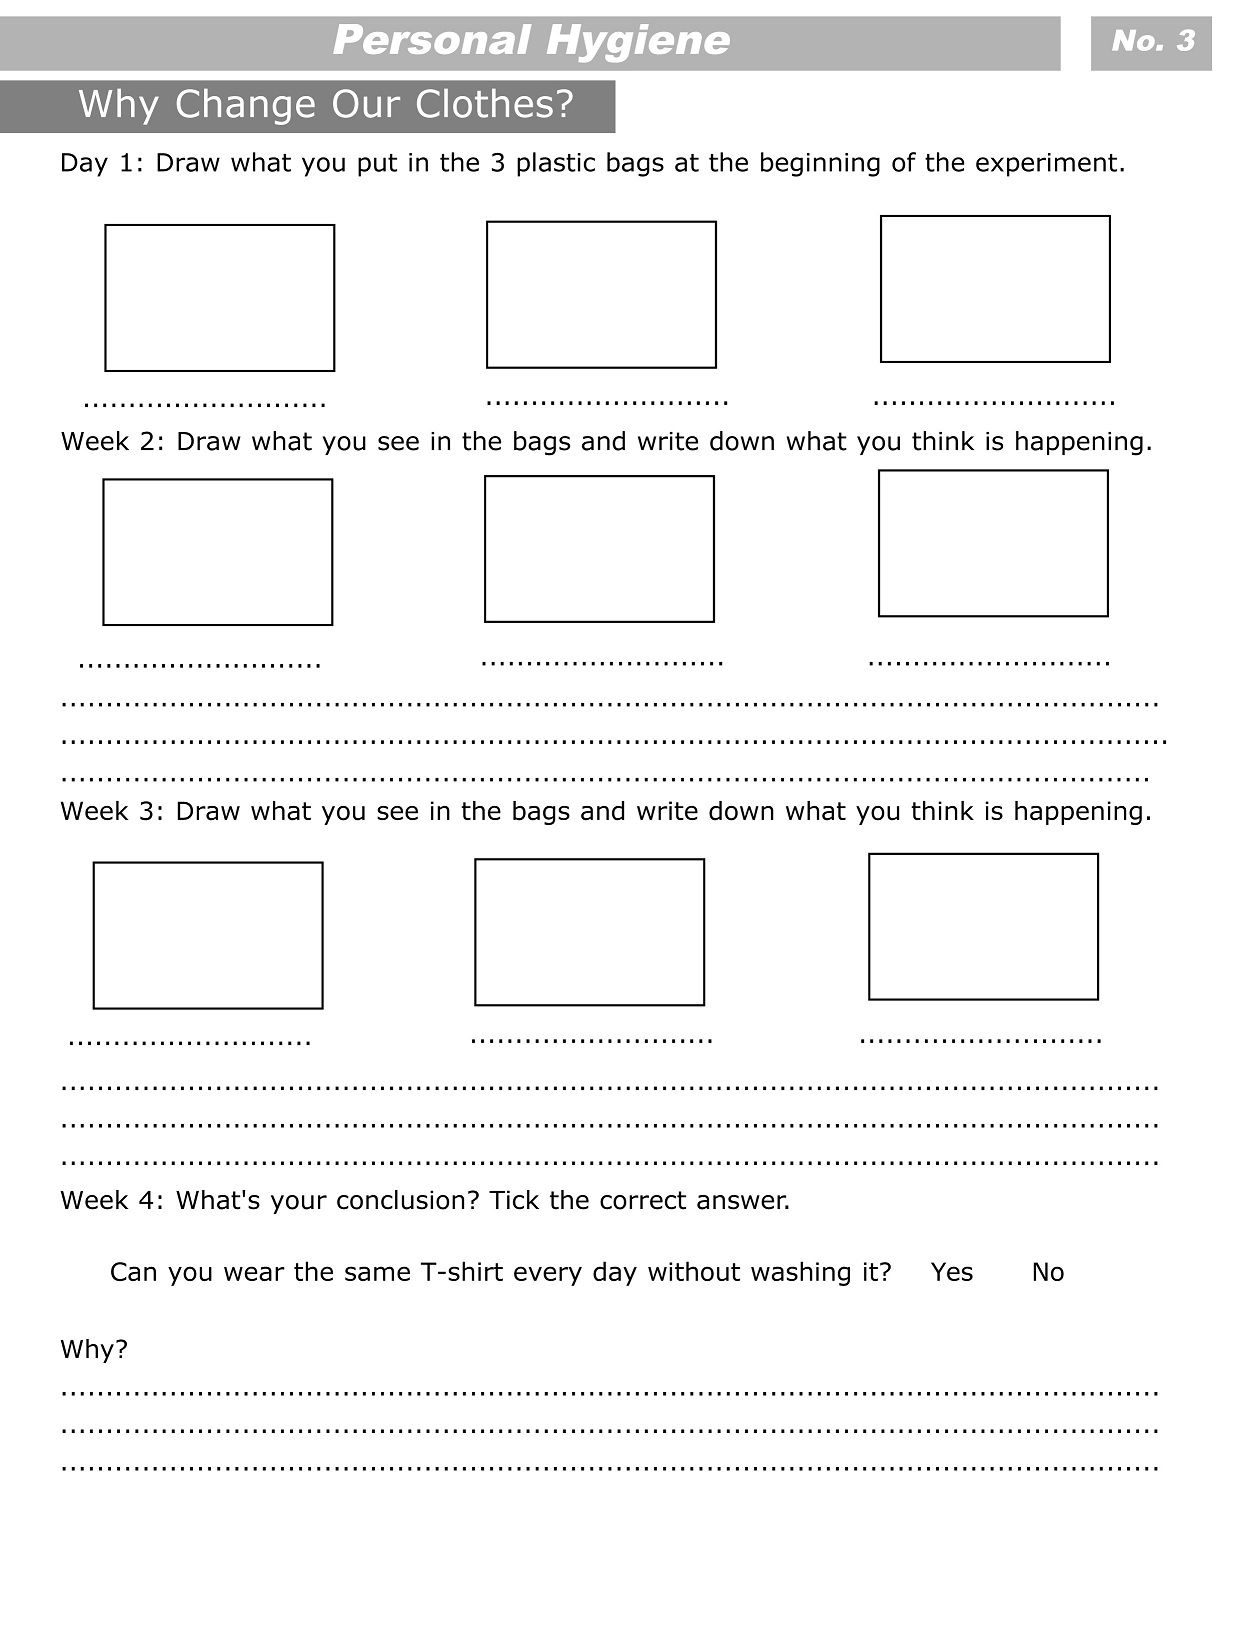 Personal Hygiene Worksheets For Kids 3 | Personal Hygiene | Personal | Printable Personal Hygiene Worksheets For Kids